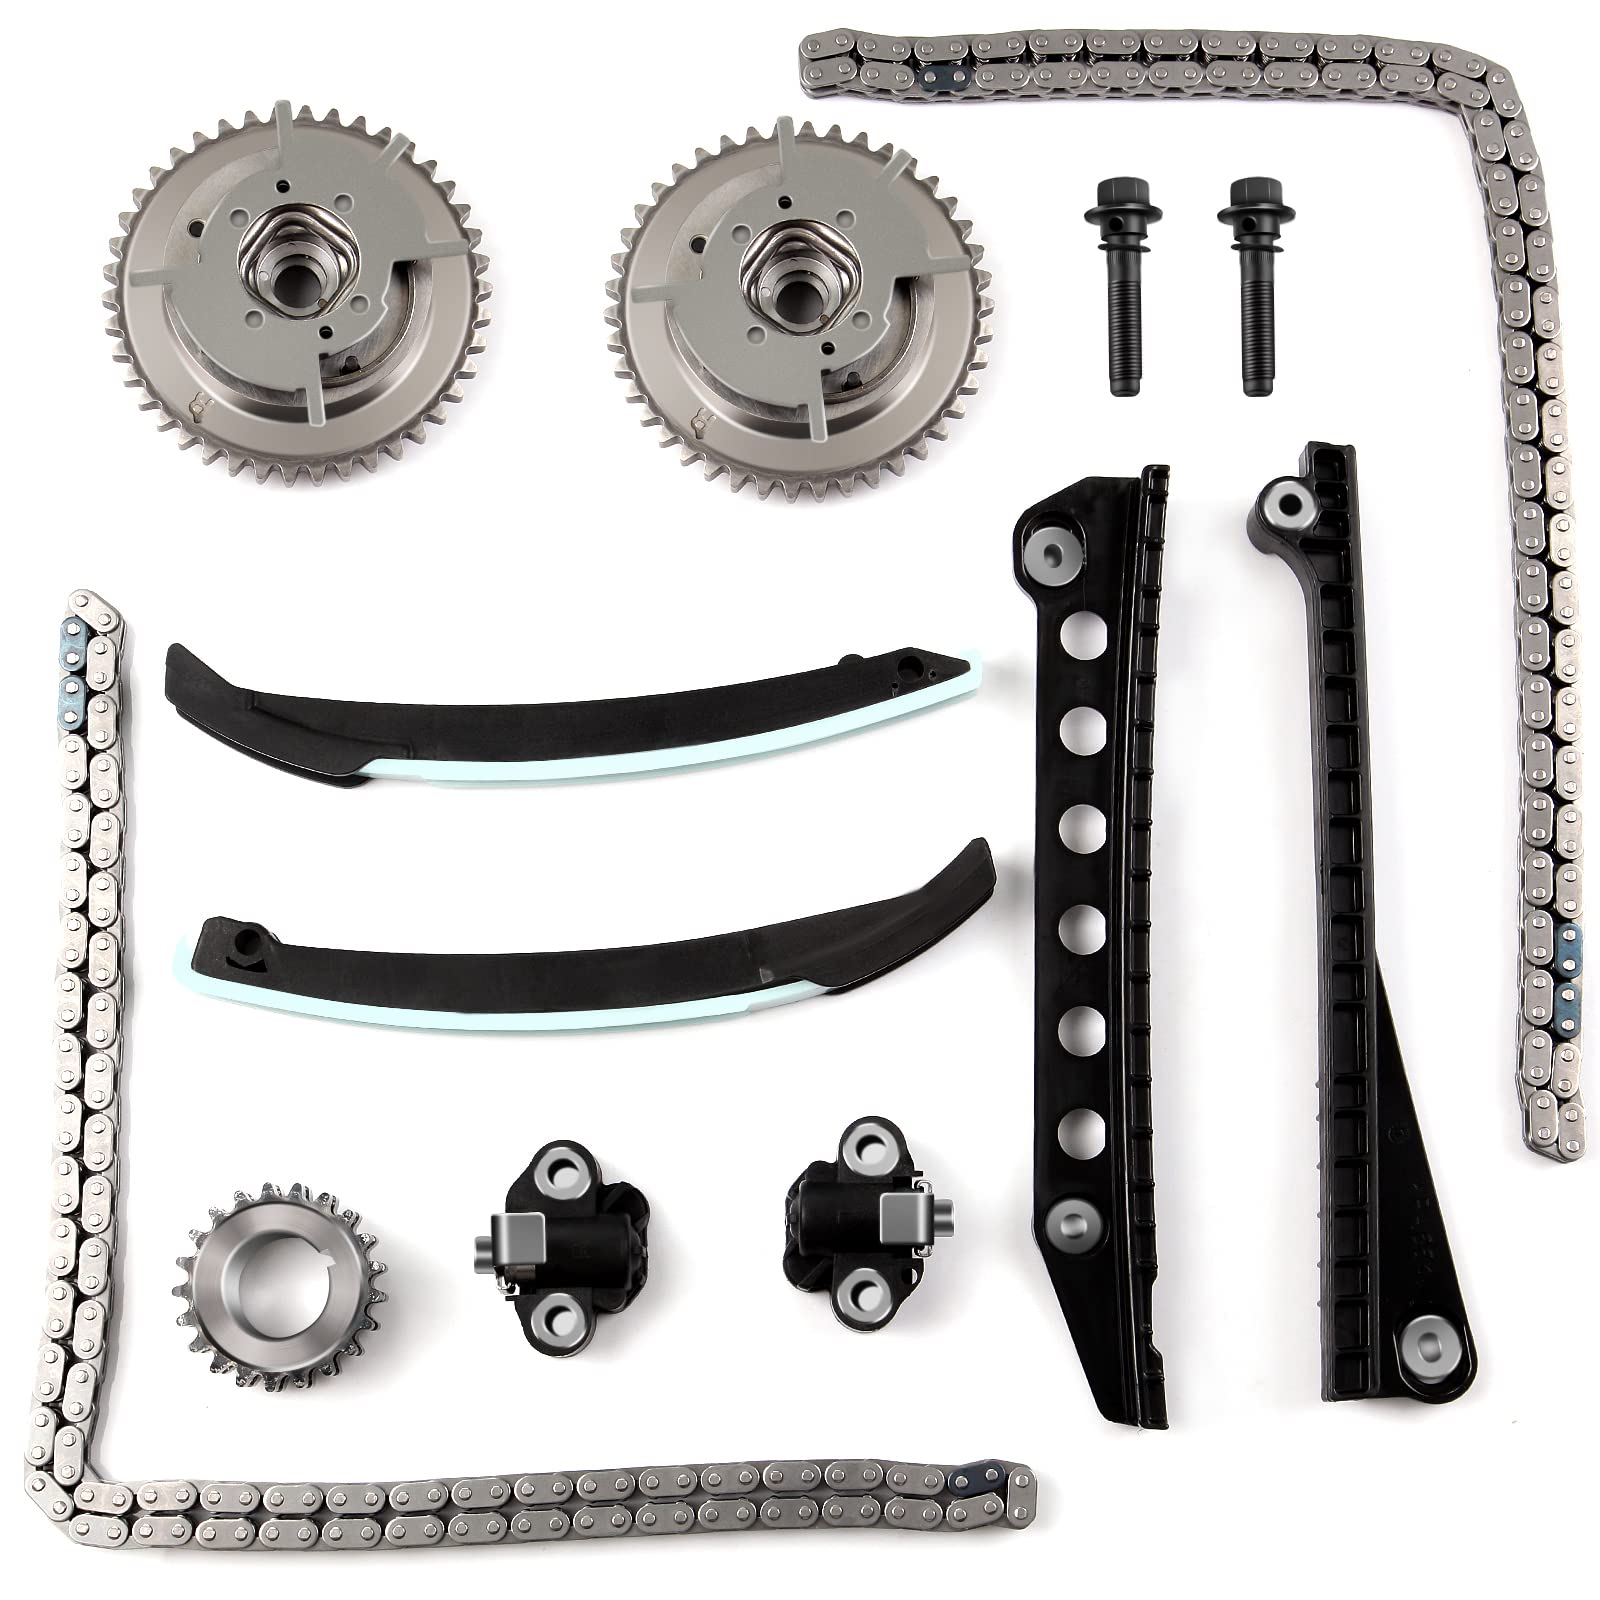 OCPTY Timing Chain Kit fits for TK6068 2004-2008 for ford Expedition 2005-2008 for ford for F-150 2004-2008 for ford F-250 Super Duty 2005-2008 for ford F-350 Super Duty 2005-2008 for Lincoln Mark LT